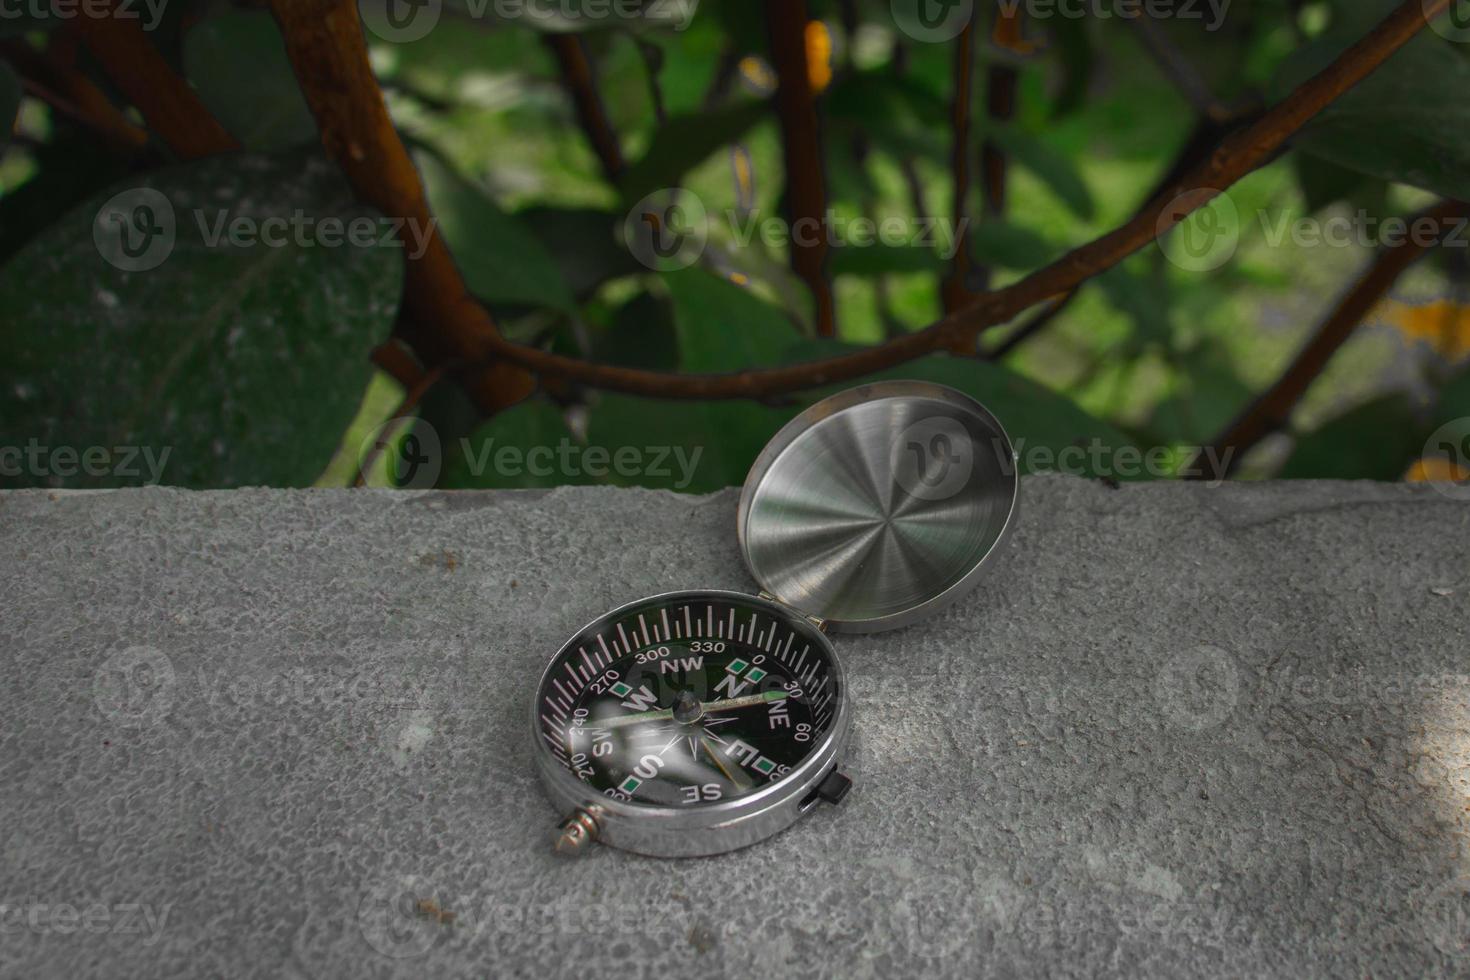 Concept for nature and adventure. After some edits, a photo of a compass placed outdoor near a tree.